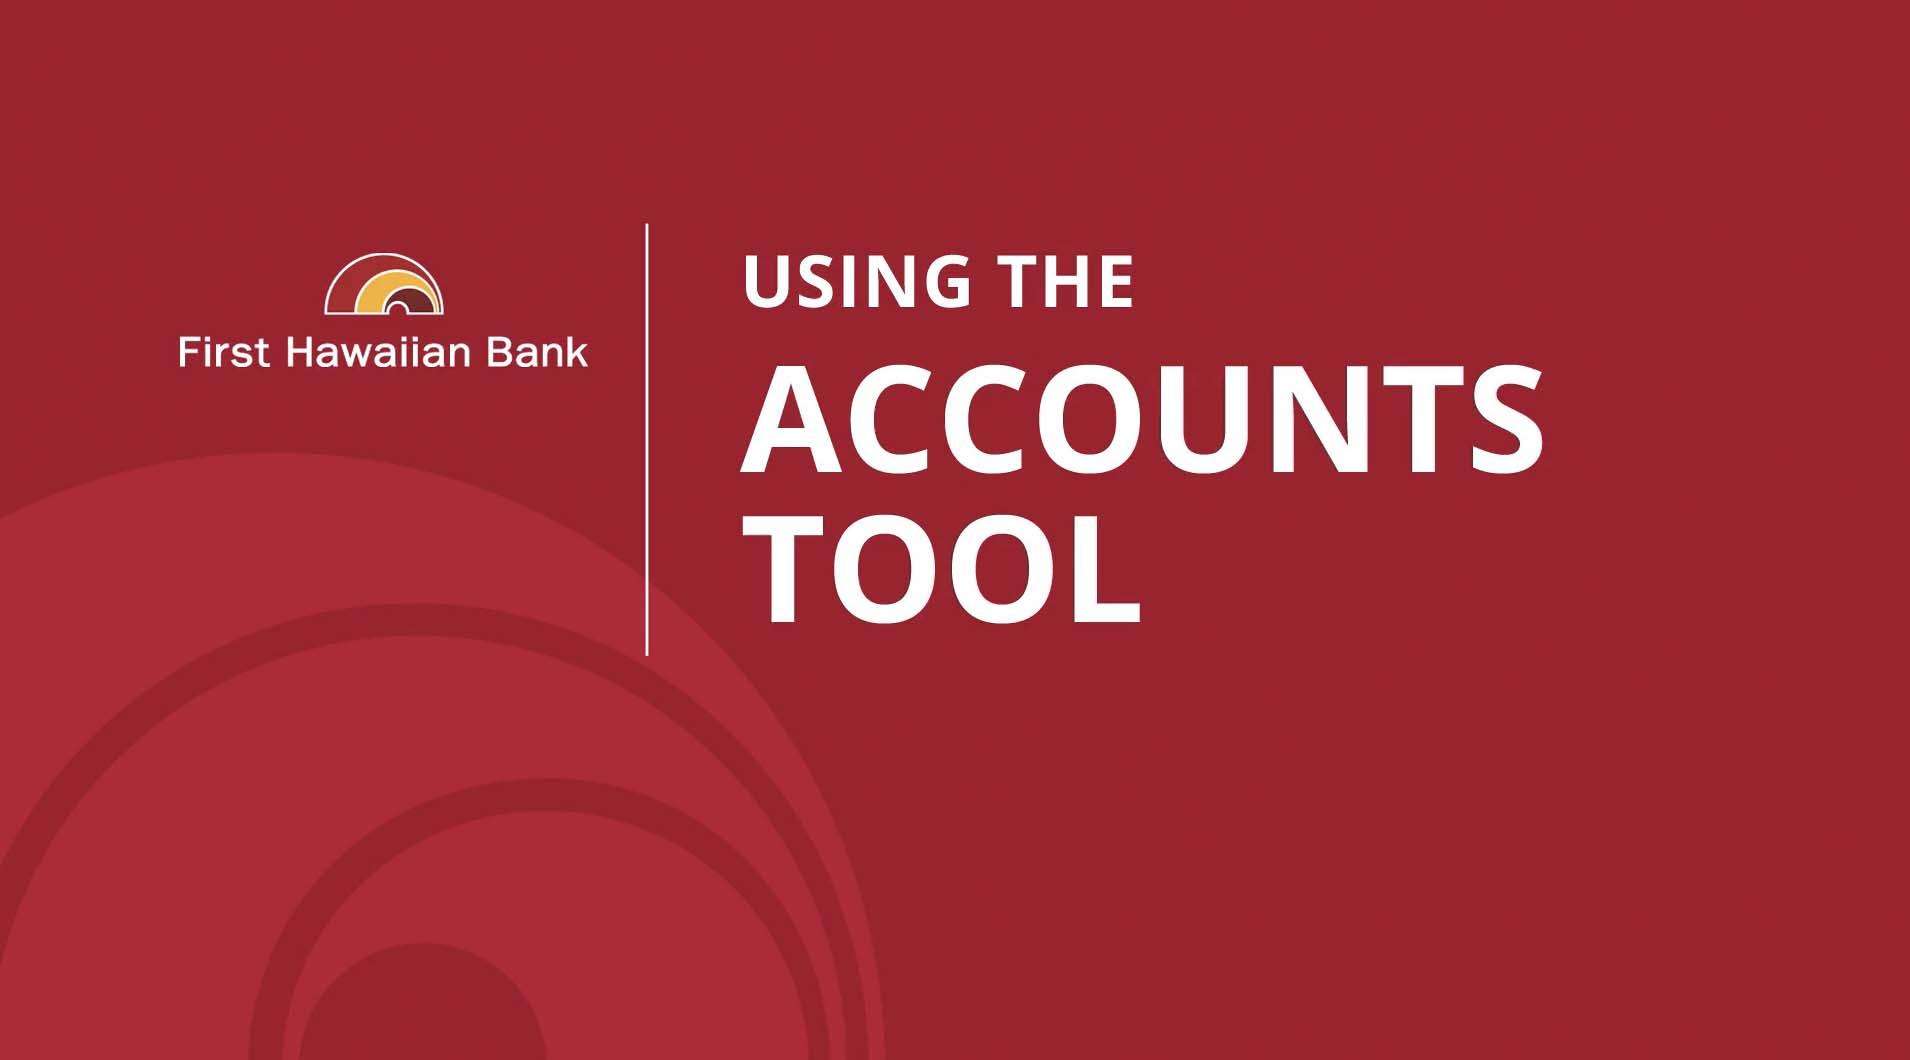 Using the Accounts Tool